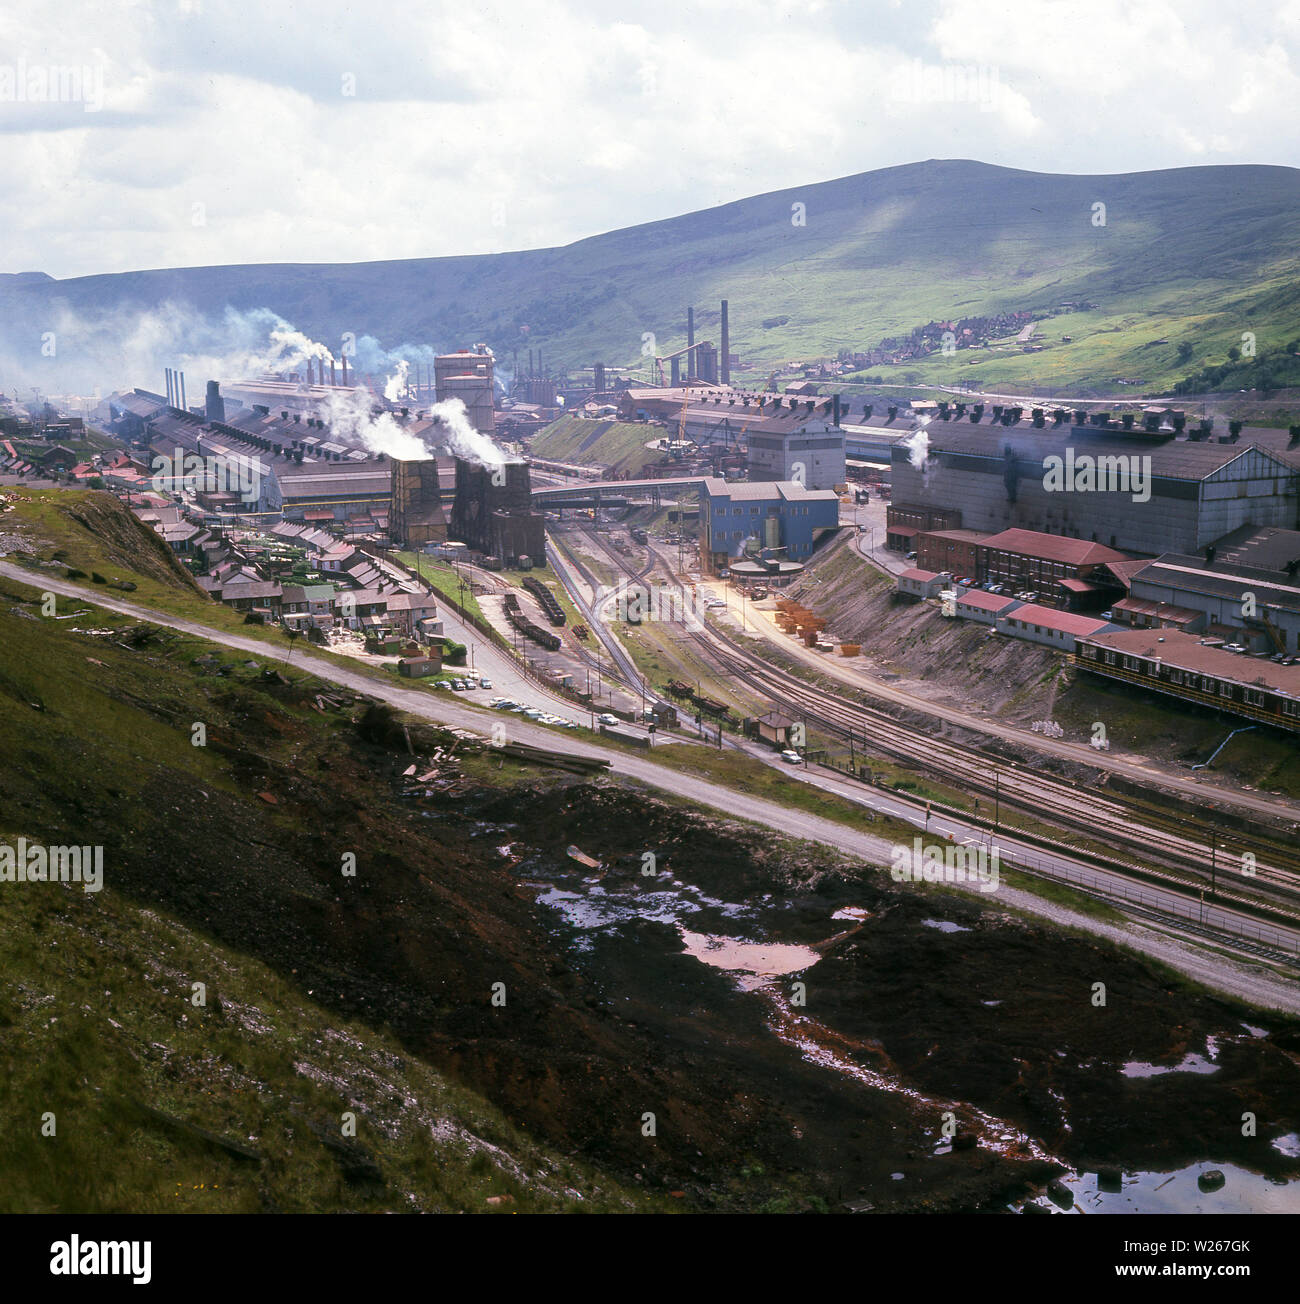 1960s, historical, view over the Ebbw Vale steelworks, Wales, showing the giant industrial complex, railway lines, workers housing and surrounding landscape, which provided both iron ore and coal. In the 1940s, the steel mill was the largest in Europe. In 1951, RTB, the company that owned the mill was nationalised. In the 1970s, due to changes in the industry and its location, remote from vast mine pits and bulk shipping facilities, steel making at the site ceased. Stock Photo